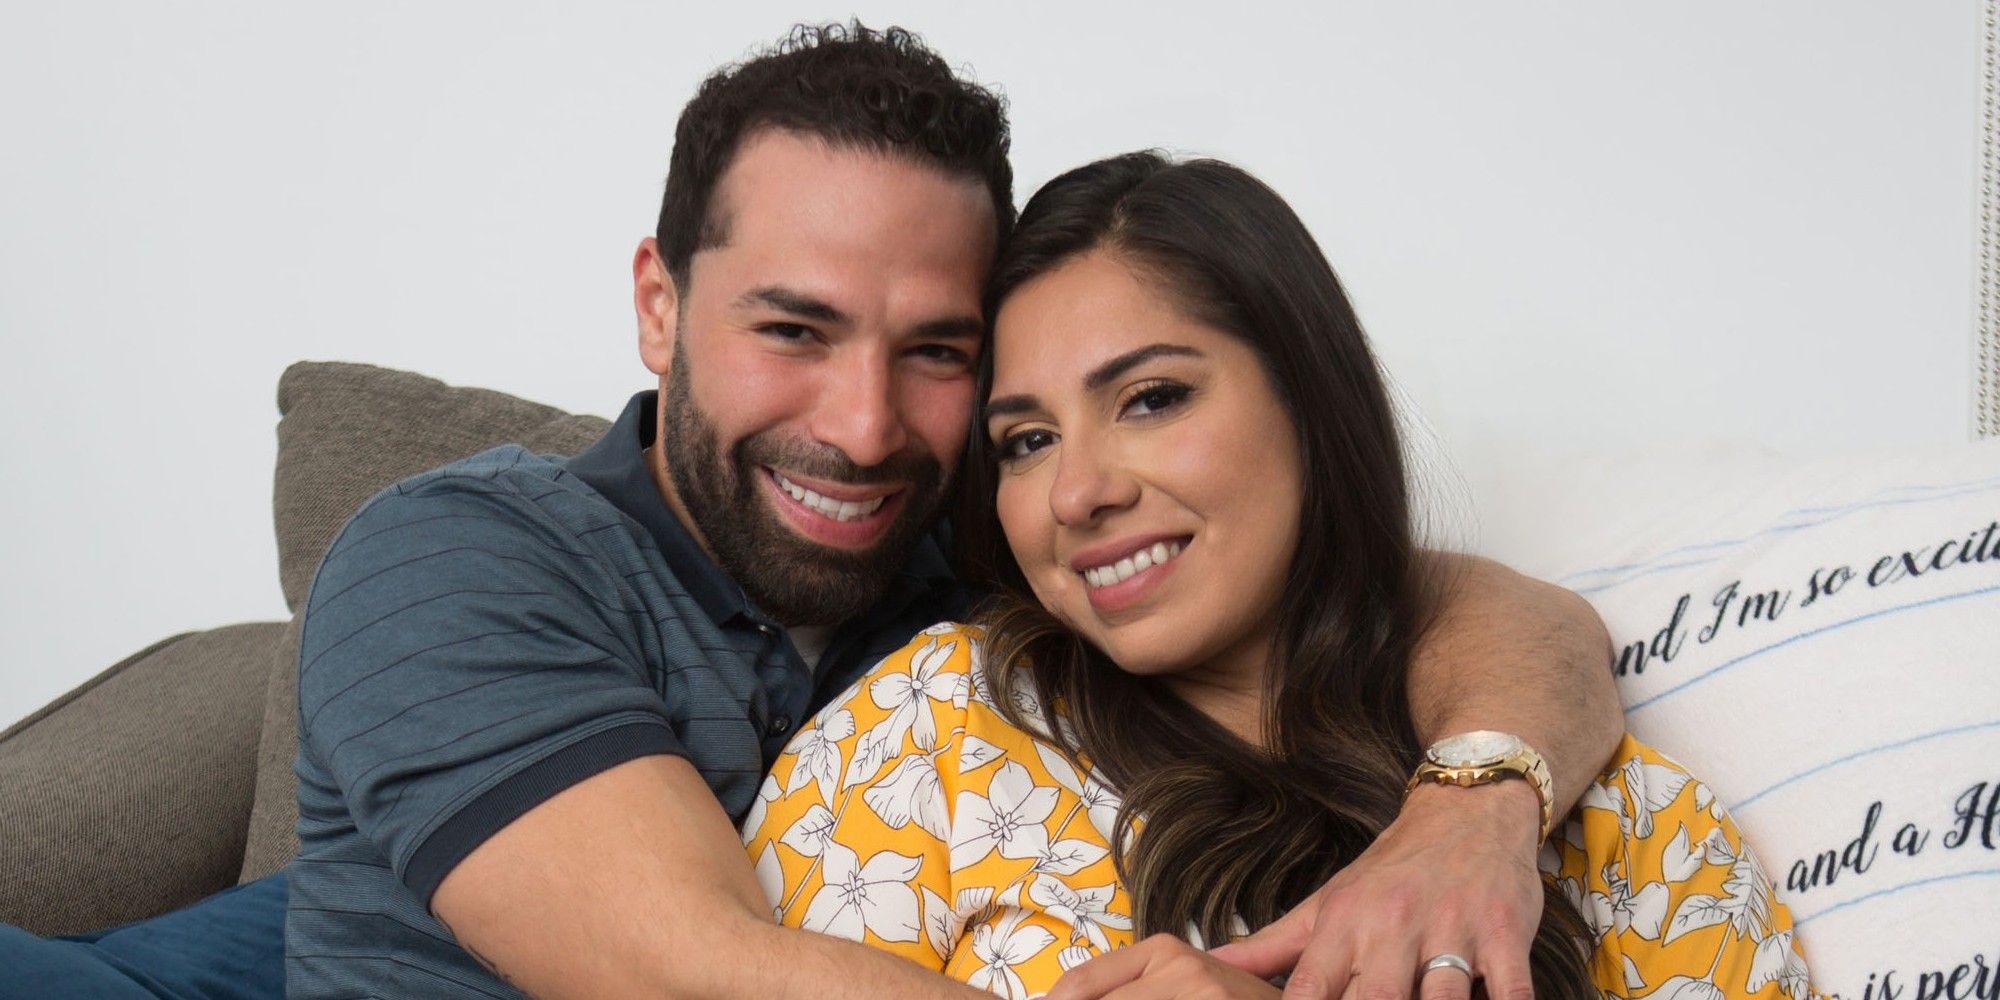 Rachel and Jose embrace in Married at First Sight.